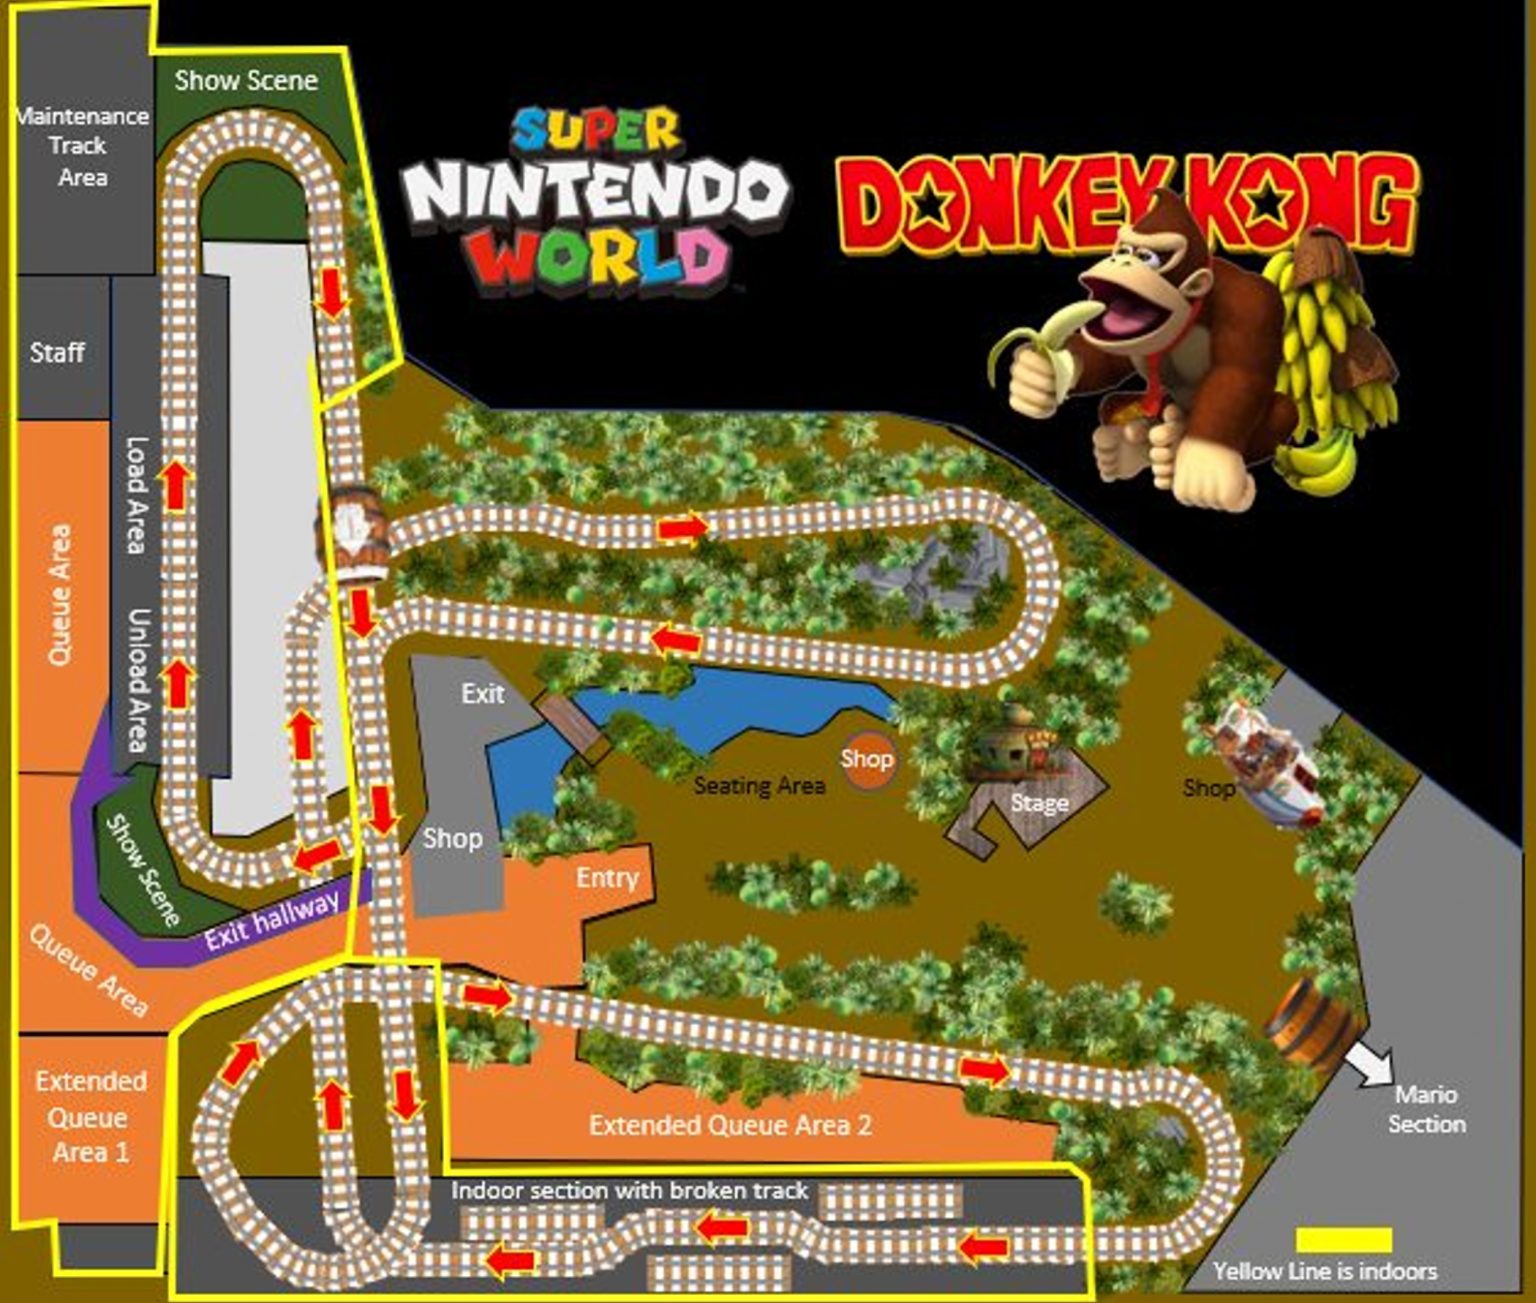 Donkey Kong Expansion Announced to Open 2024 at Super Nintendo World